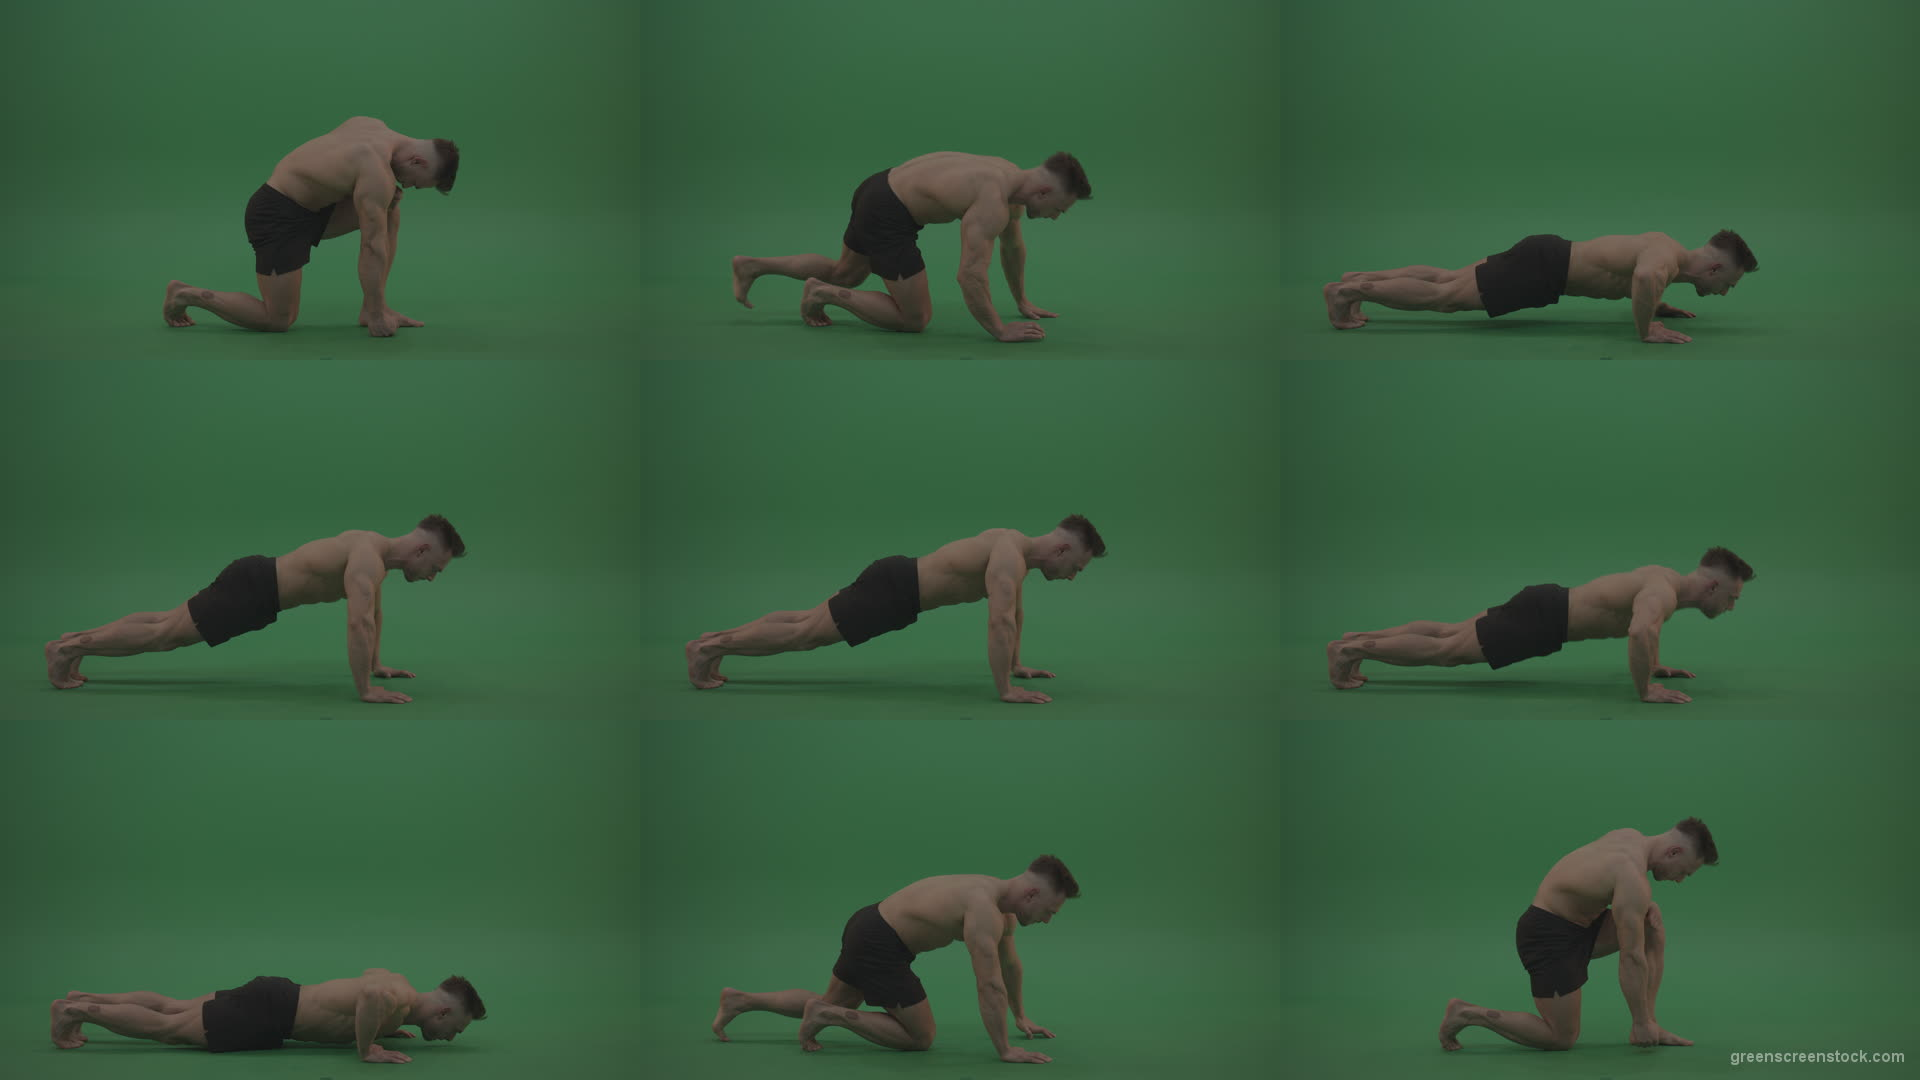 Young_Bodybuilder_Starts_Working_Out_From_Crouching_Terminator_Position_Does_Pull_Ups_Turns_Back_To_The_Start_Position_On_Green_Screen_Wall_Background Green Screen Stock